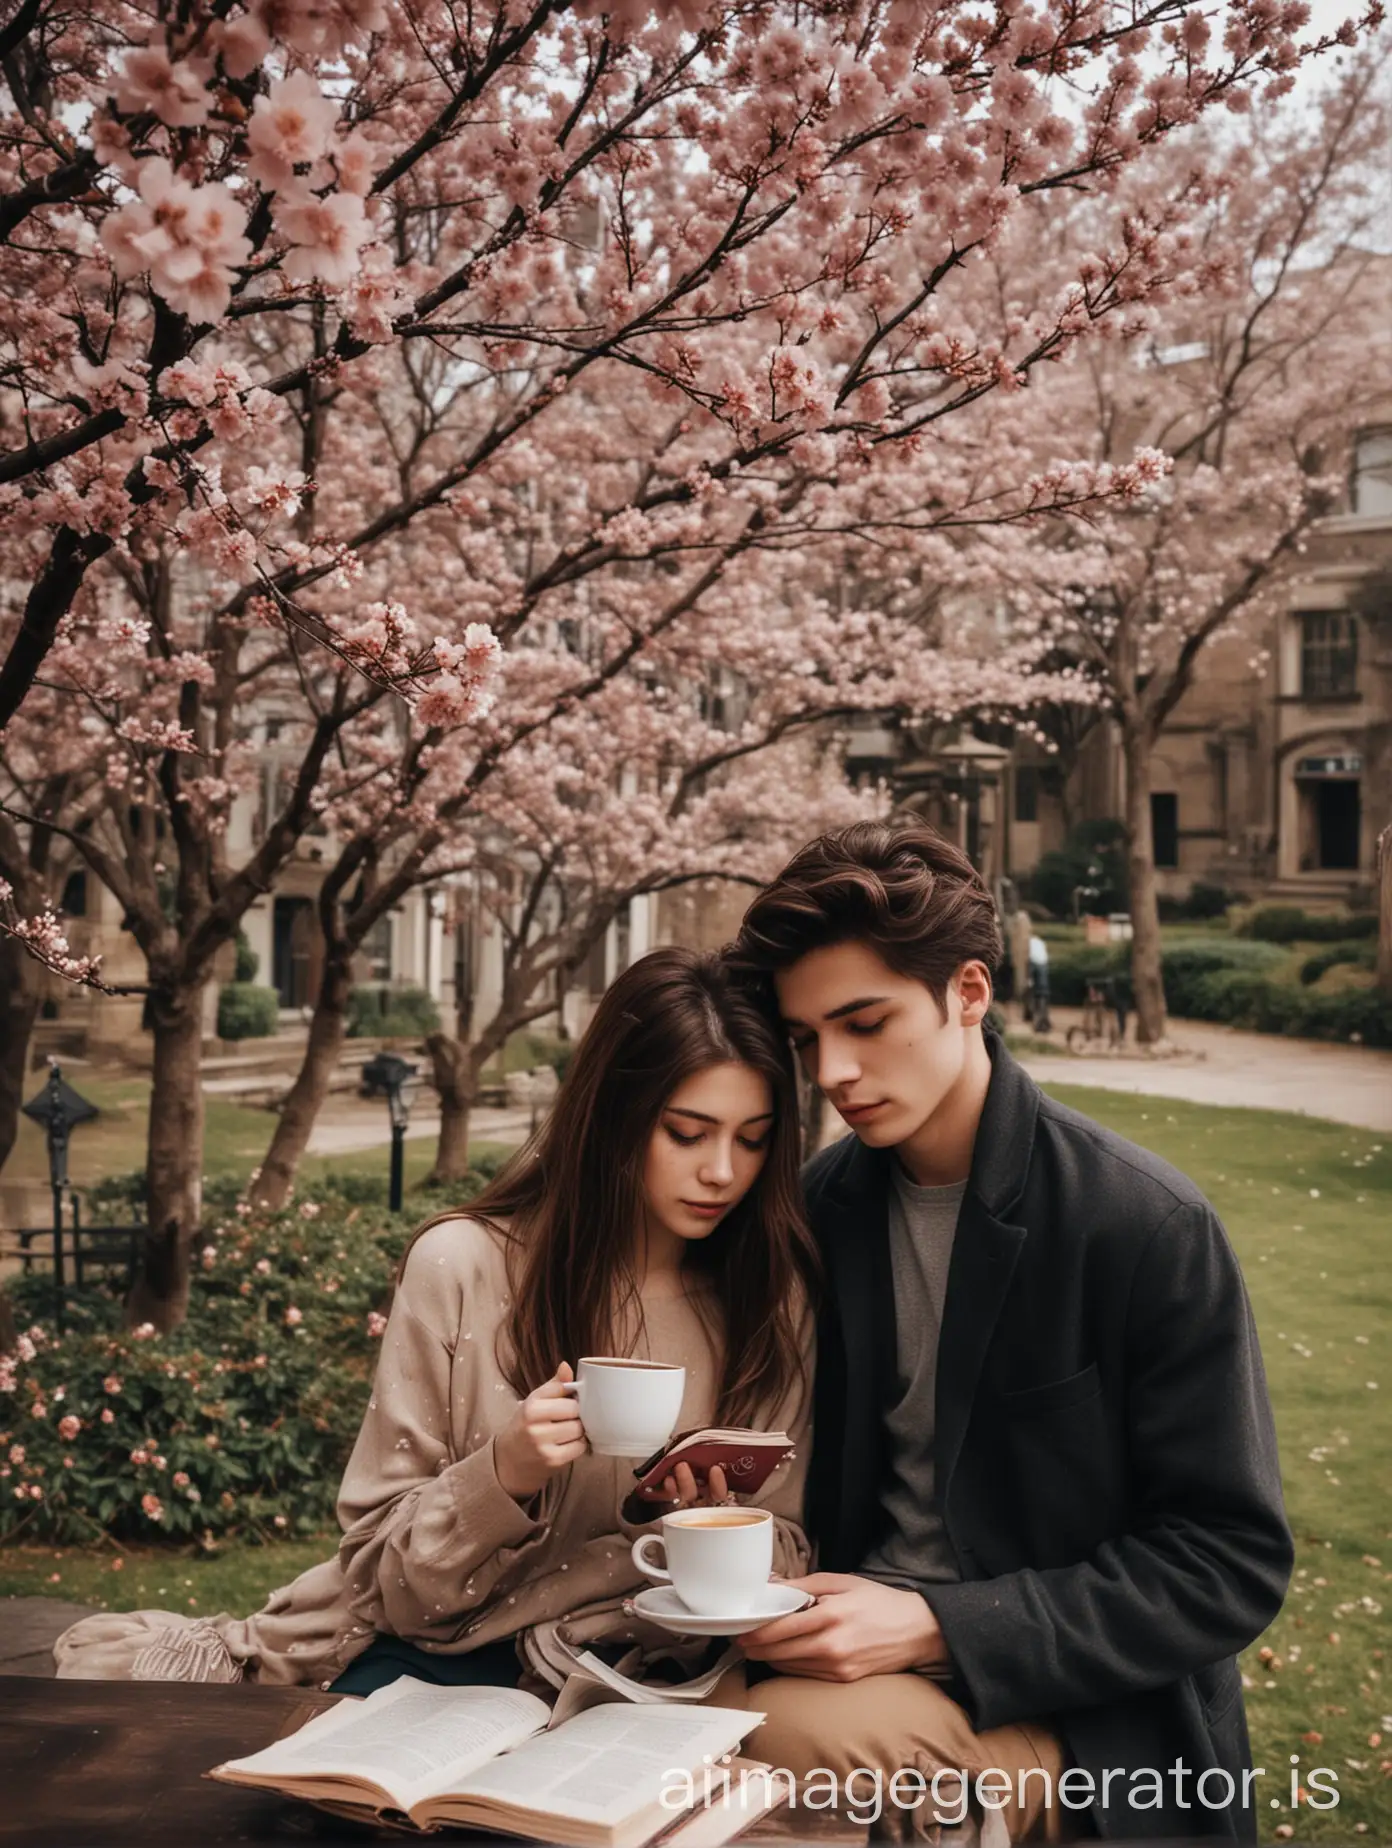 Vintage-College-Setting-with-a-Pretty-Girl-and-a-Hot-Boy-Reading-Coffee-Near-a-Cherry-Blossom-Tree